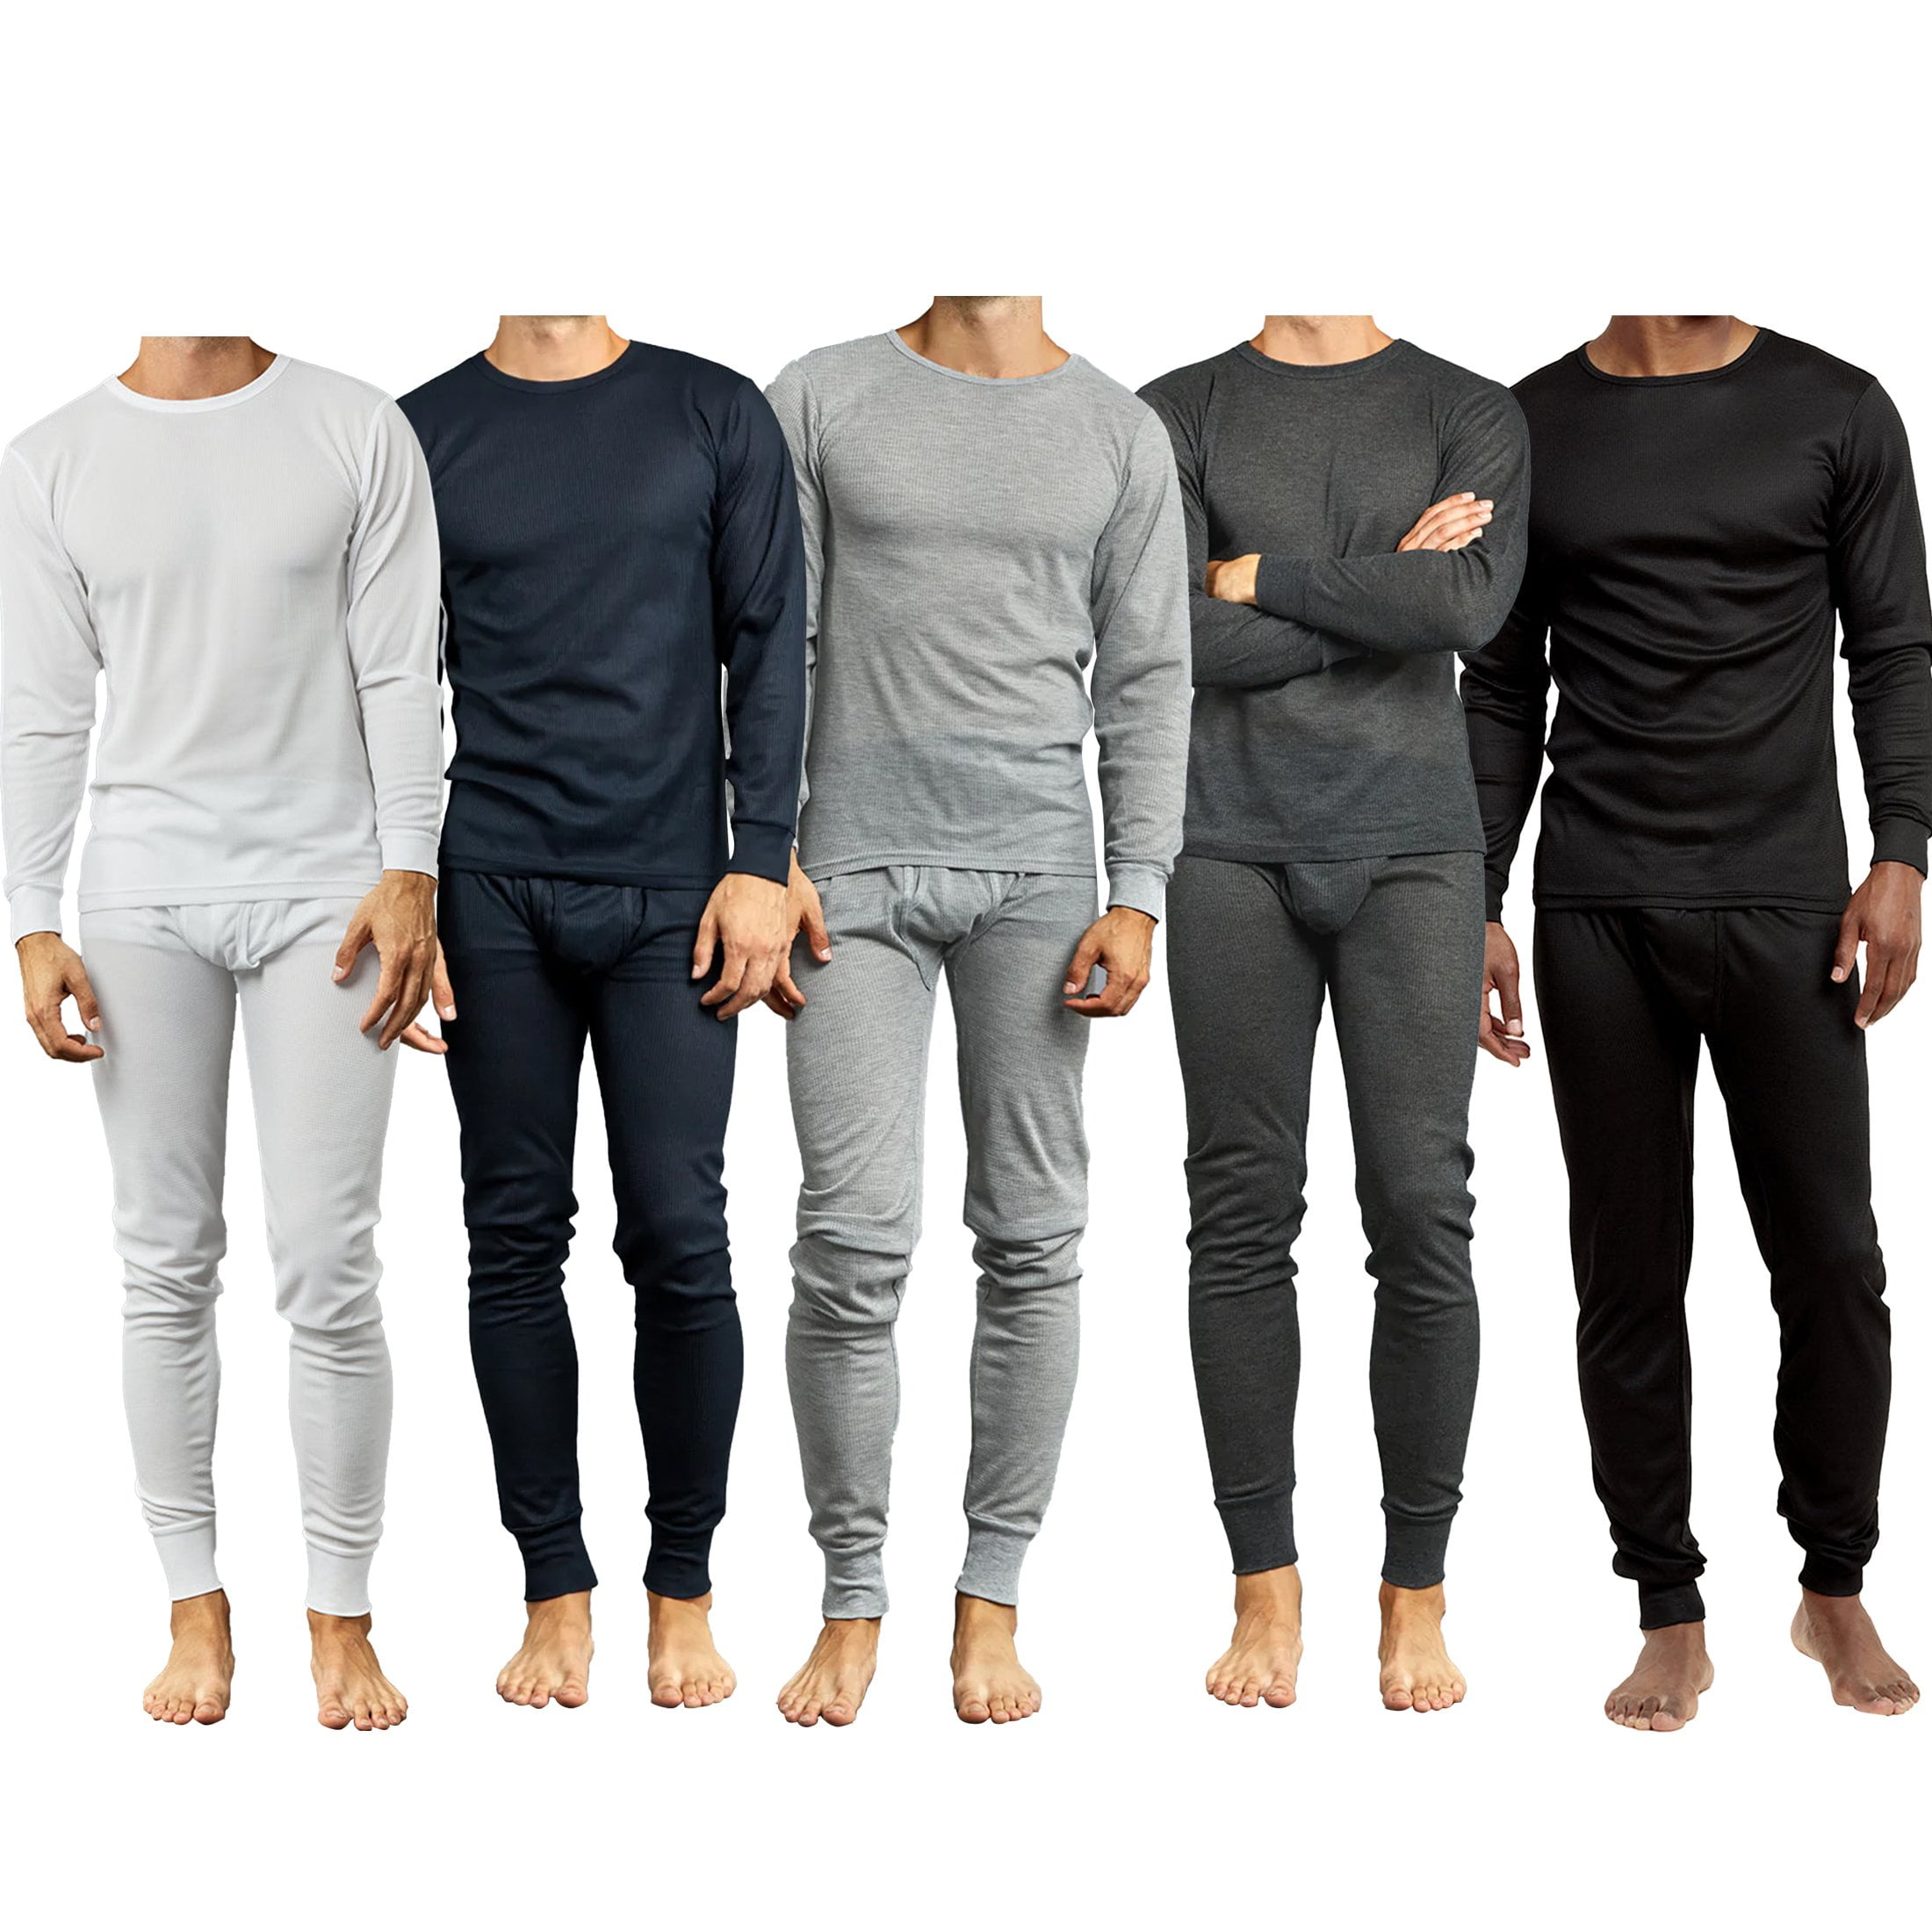 2-Piece: Mens Moisture Wicking Long Johns Base Layer Thermal Underwear ...